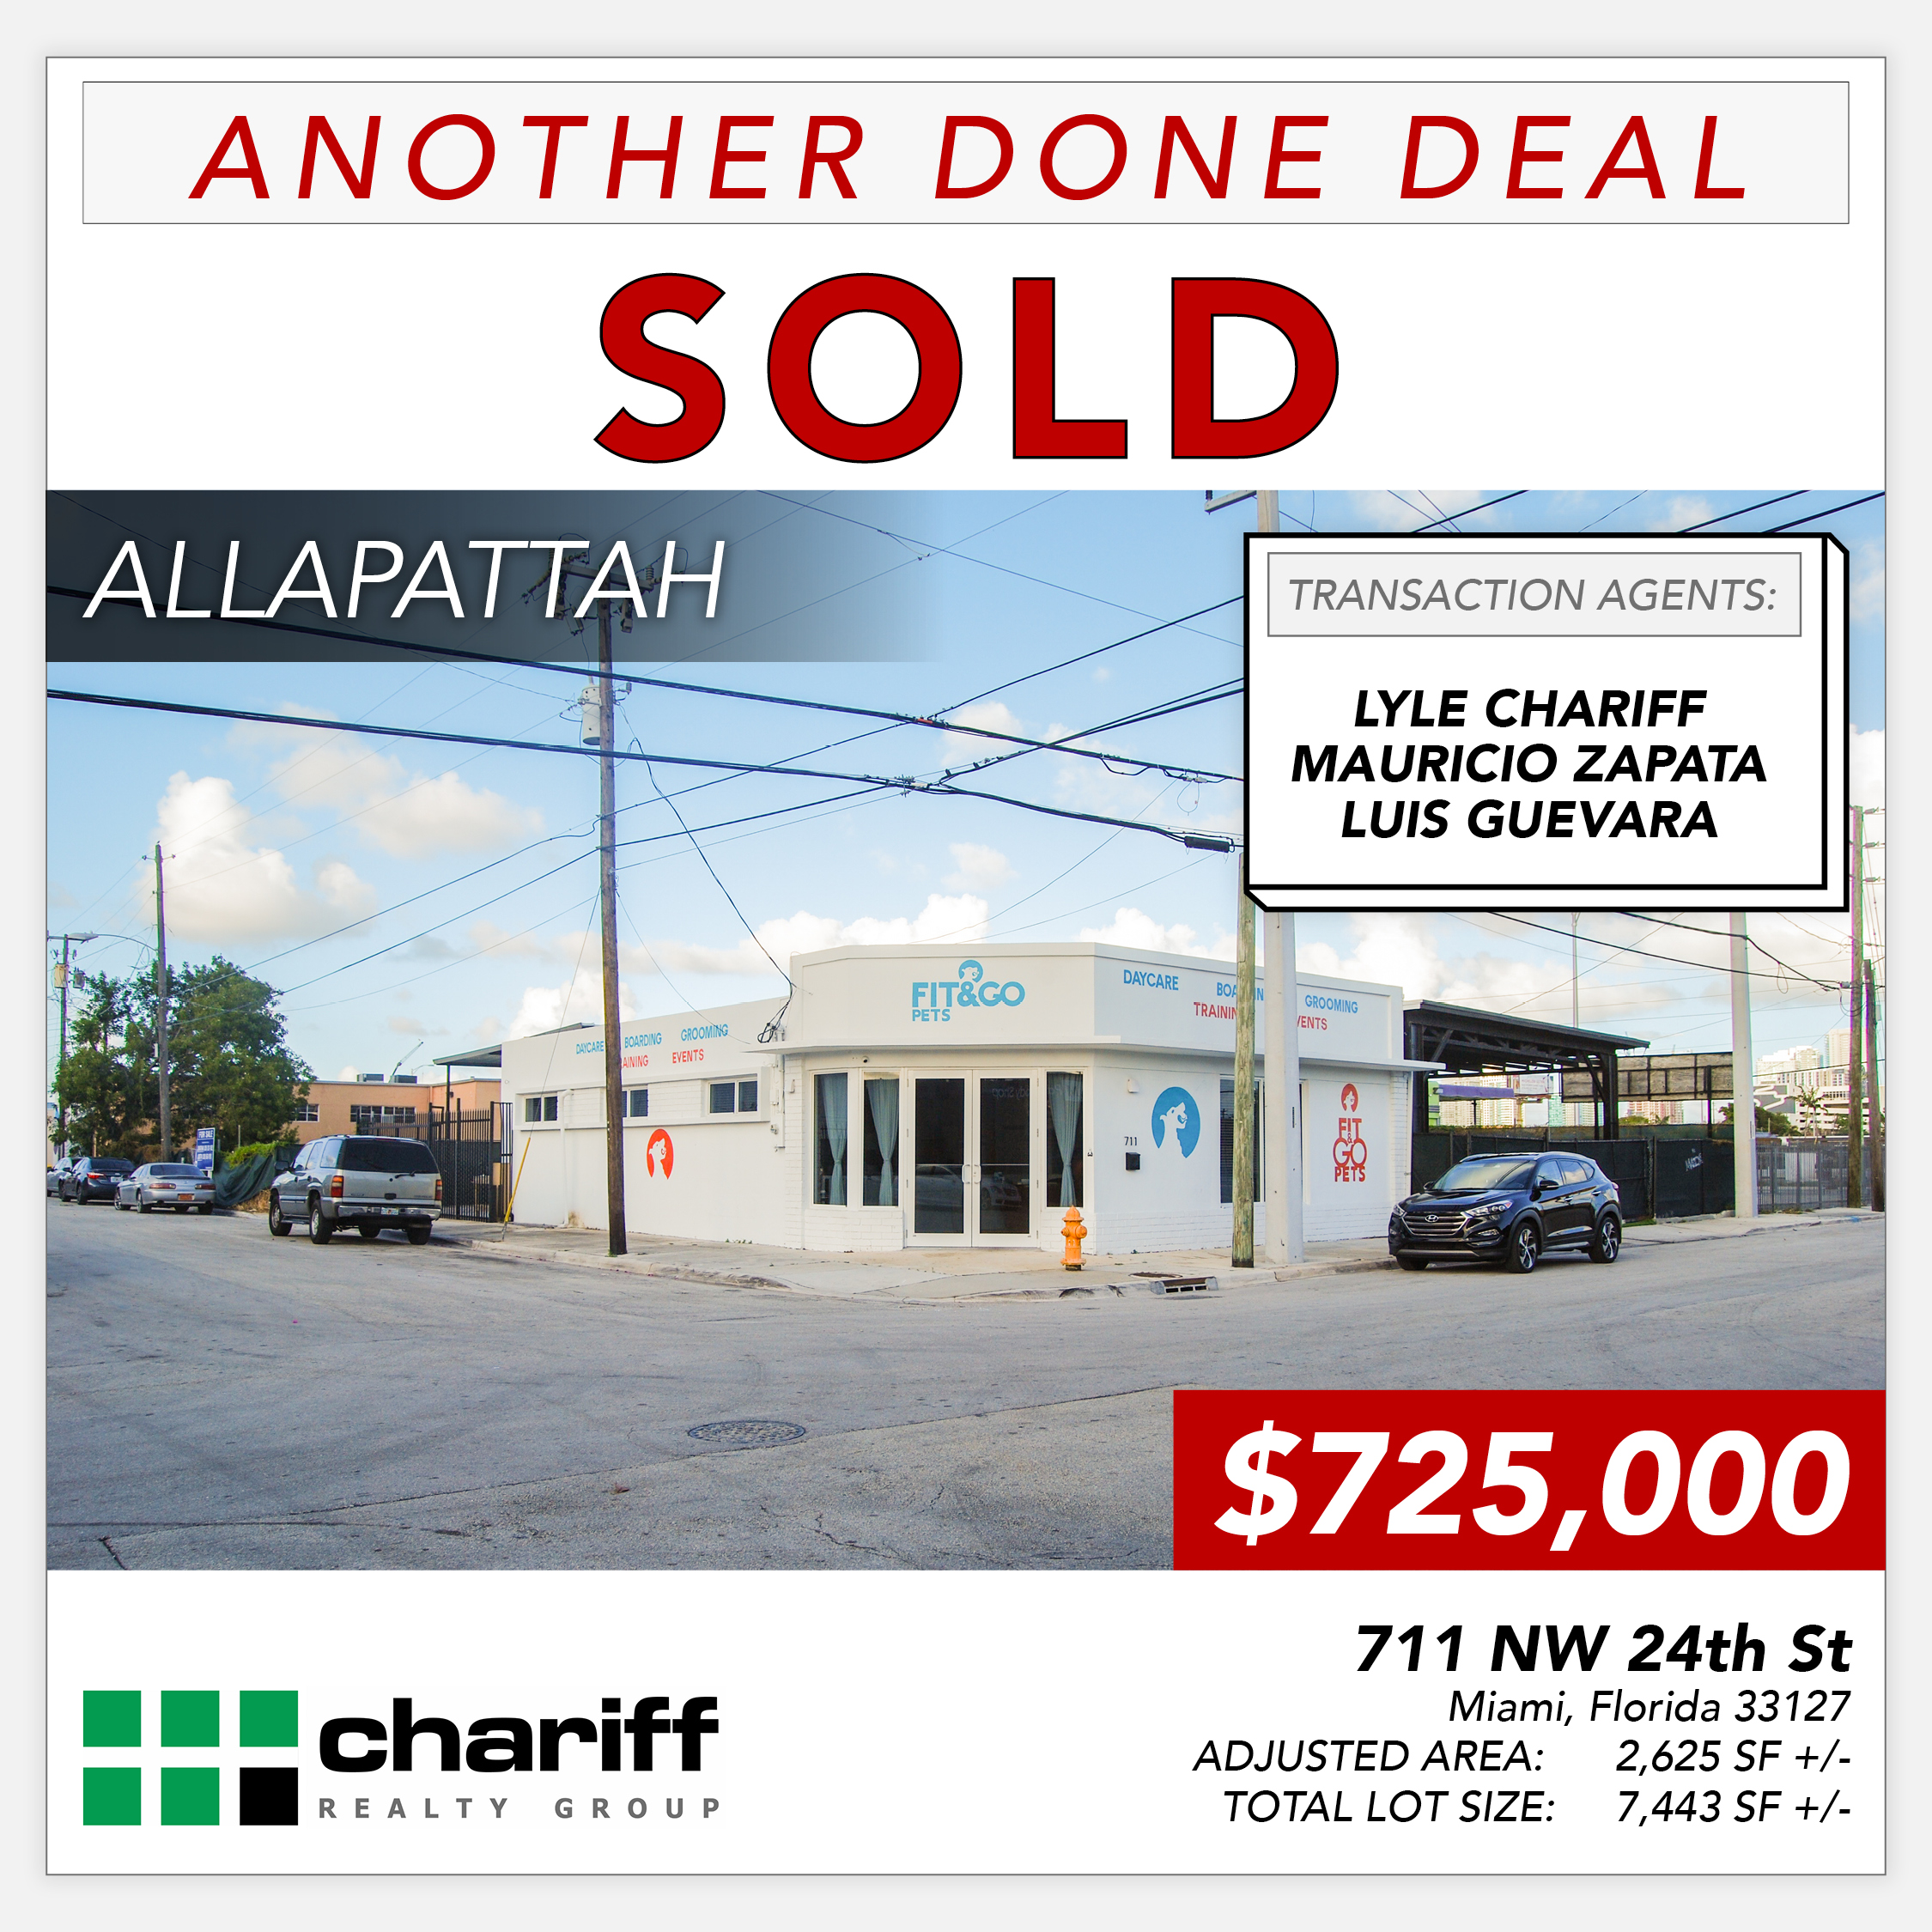 711 NW 24th St - Another Done Deal-Sold-Allapattah-Miami-Florida-33127-Chariff Realty Group